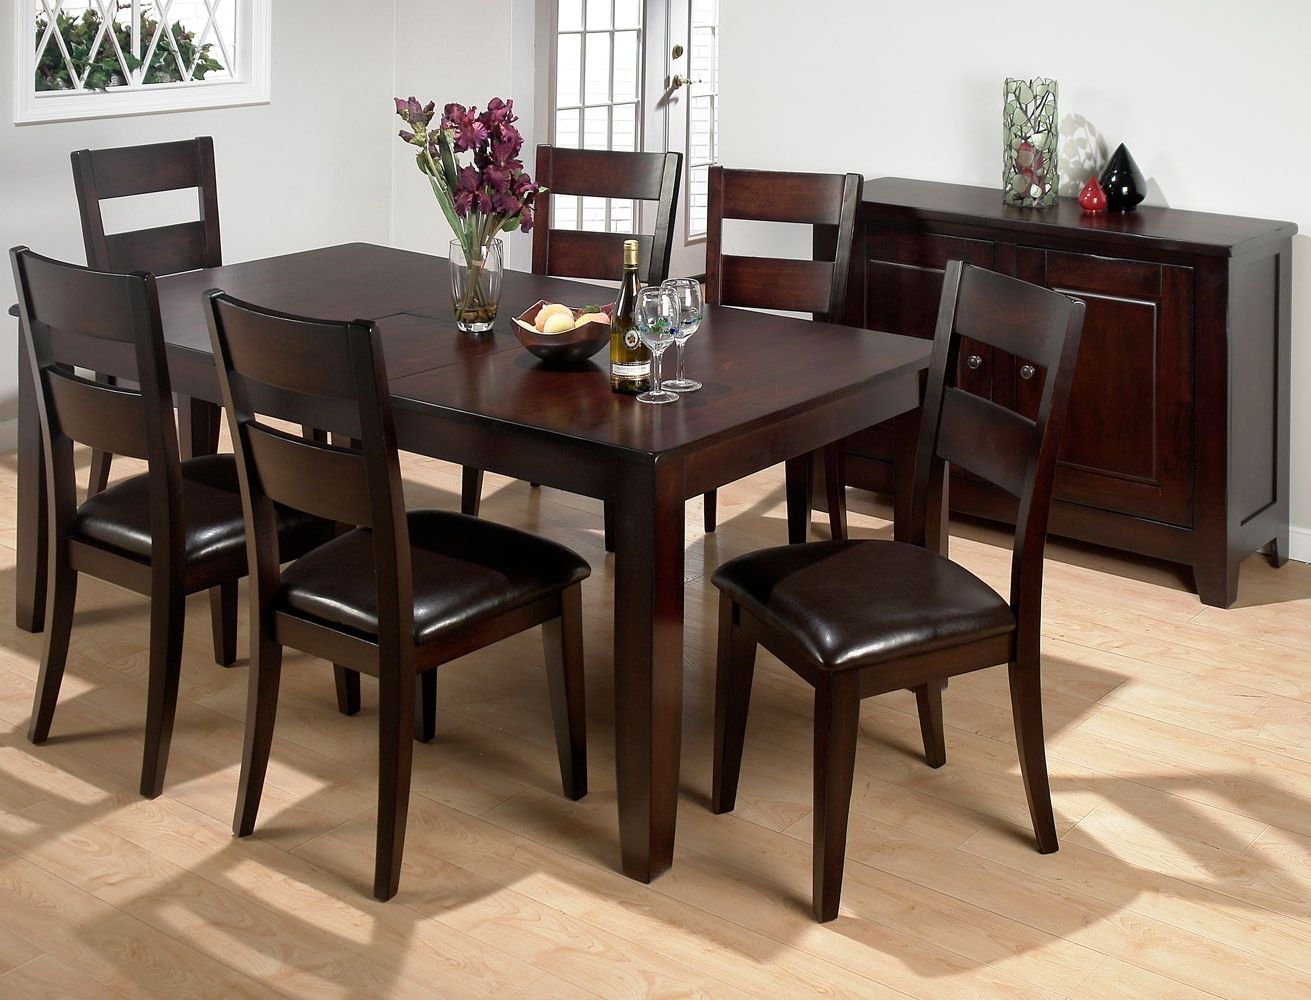 2017 Dark Wood Dining Tables And 6 Chairs Throughout Luxury Wooden Dining Room Table With 6 Chairs – Dining Room Design 2019 (Photo 22 of 25)